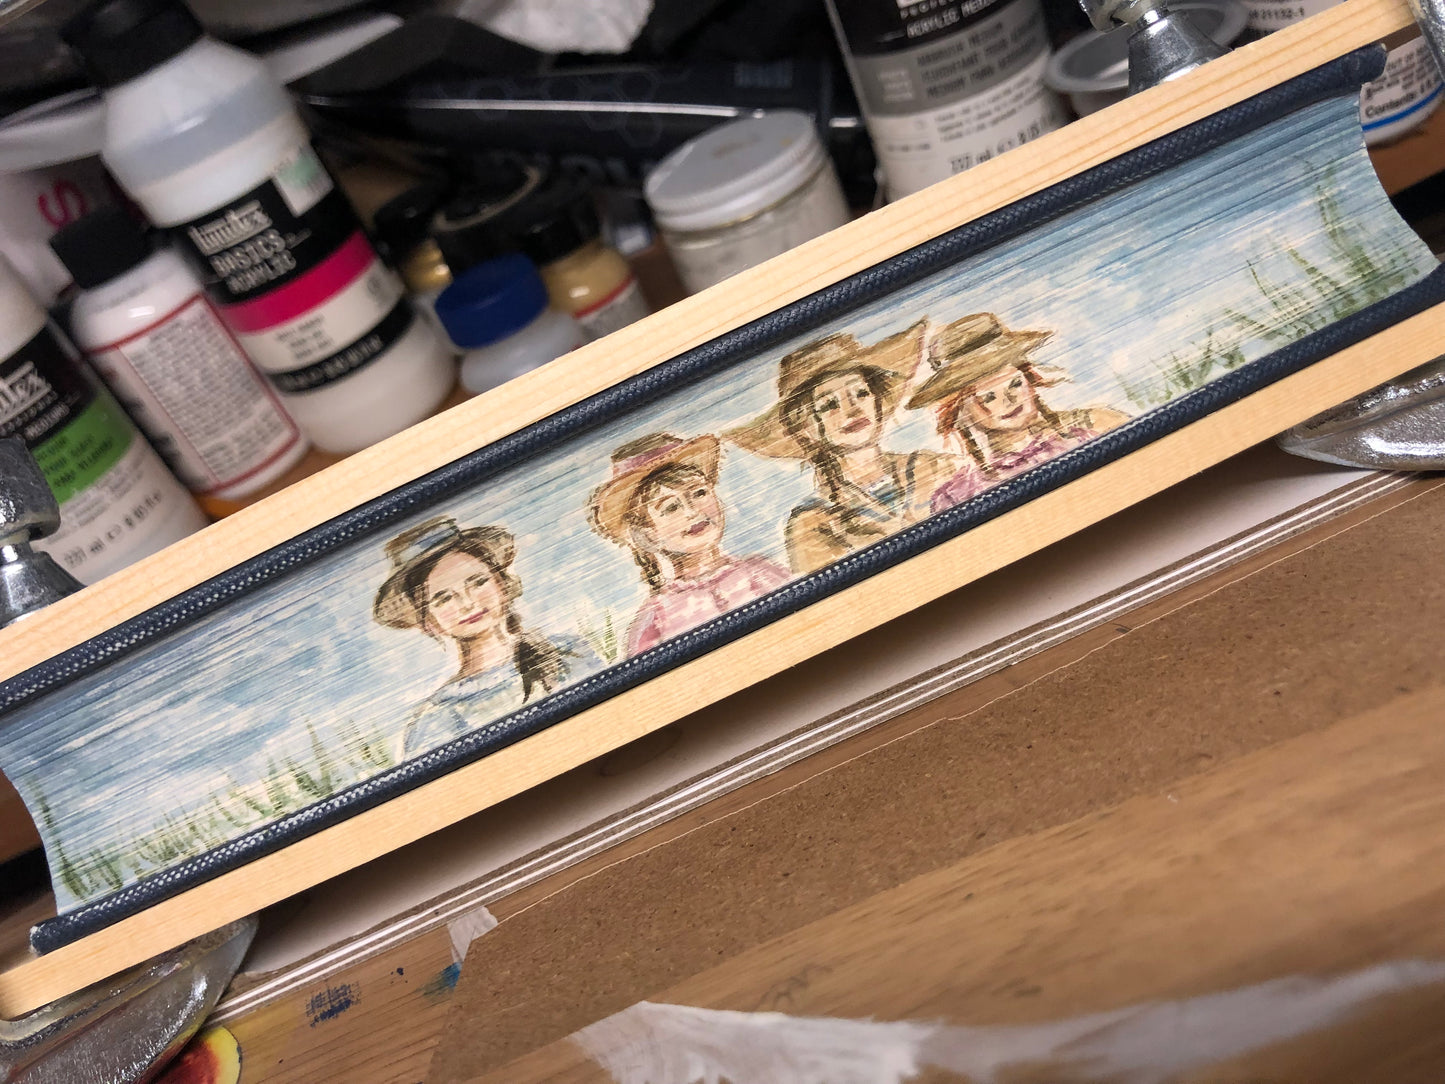 “Little Women” fore-edge book painting